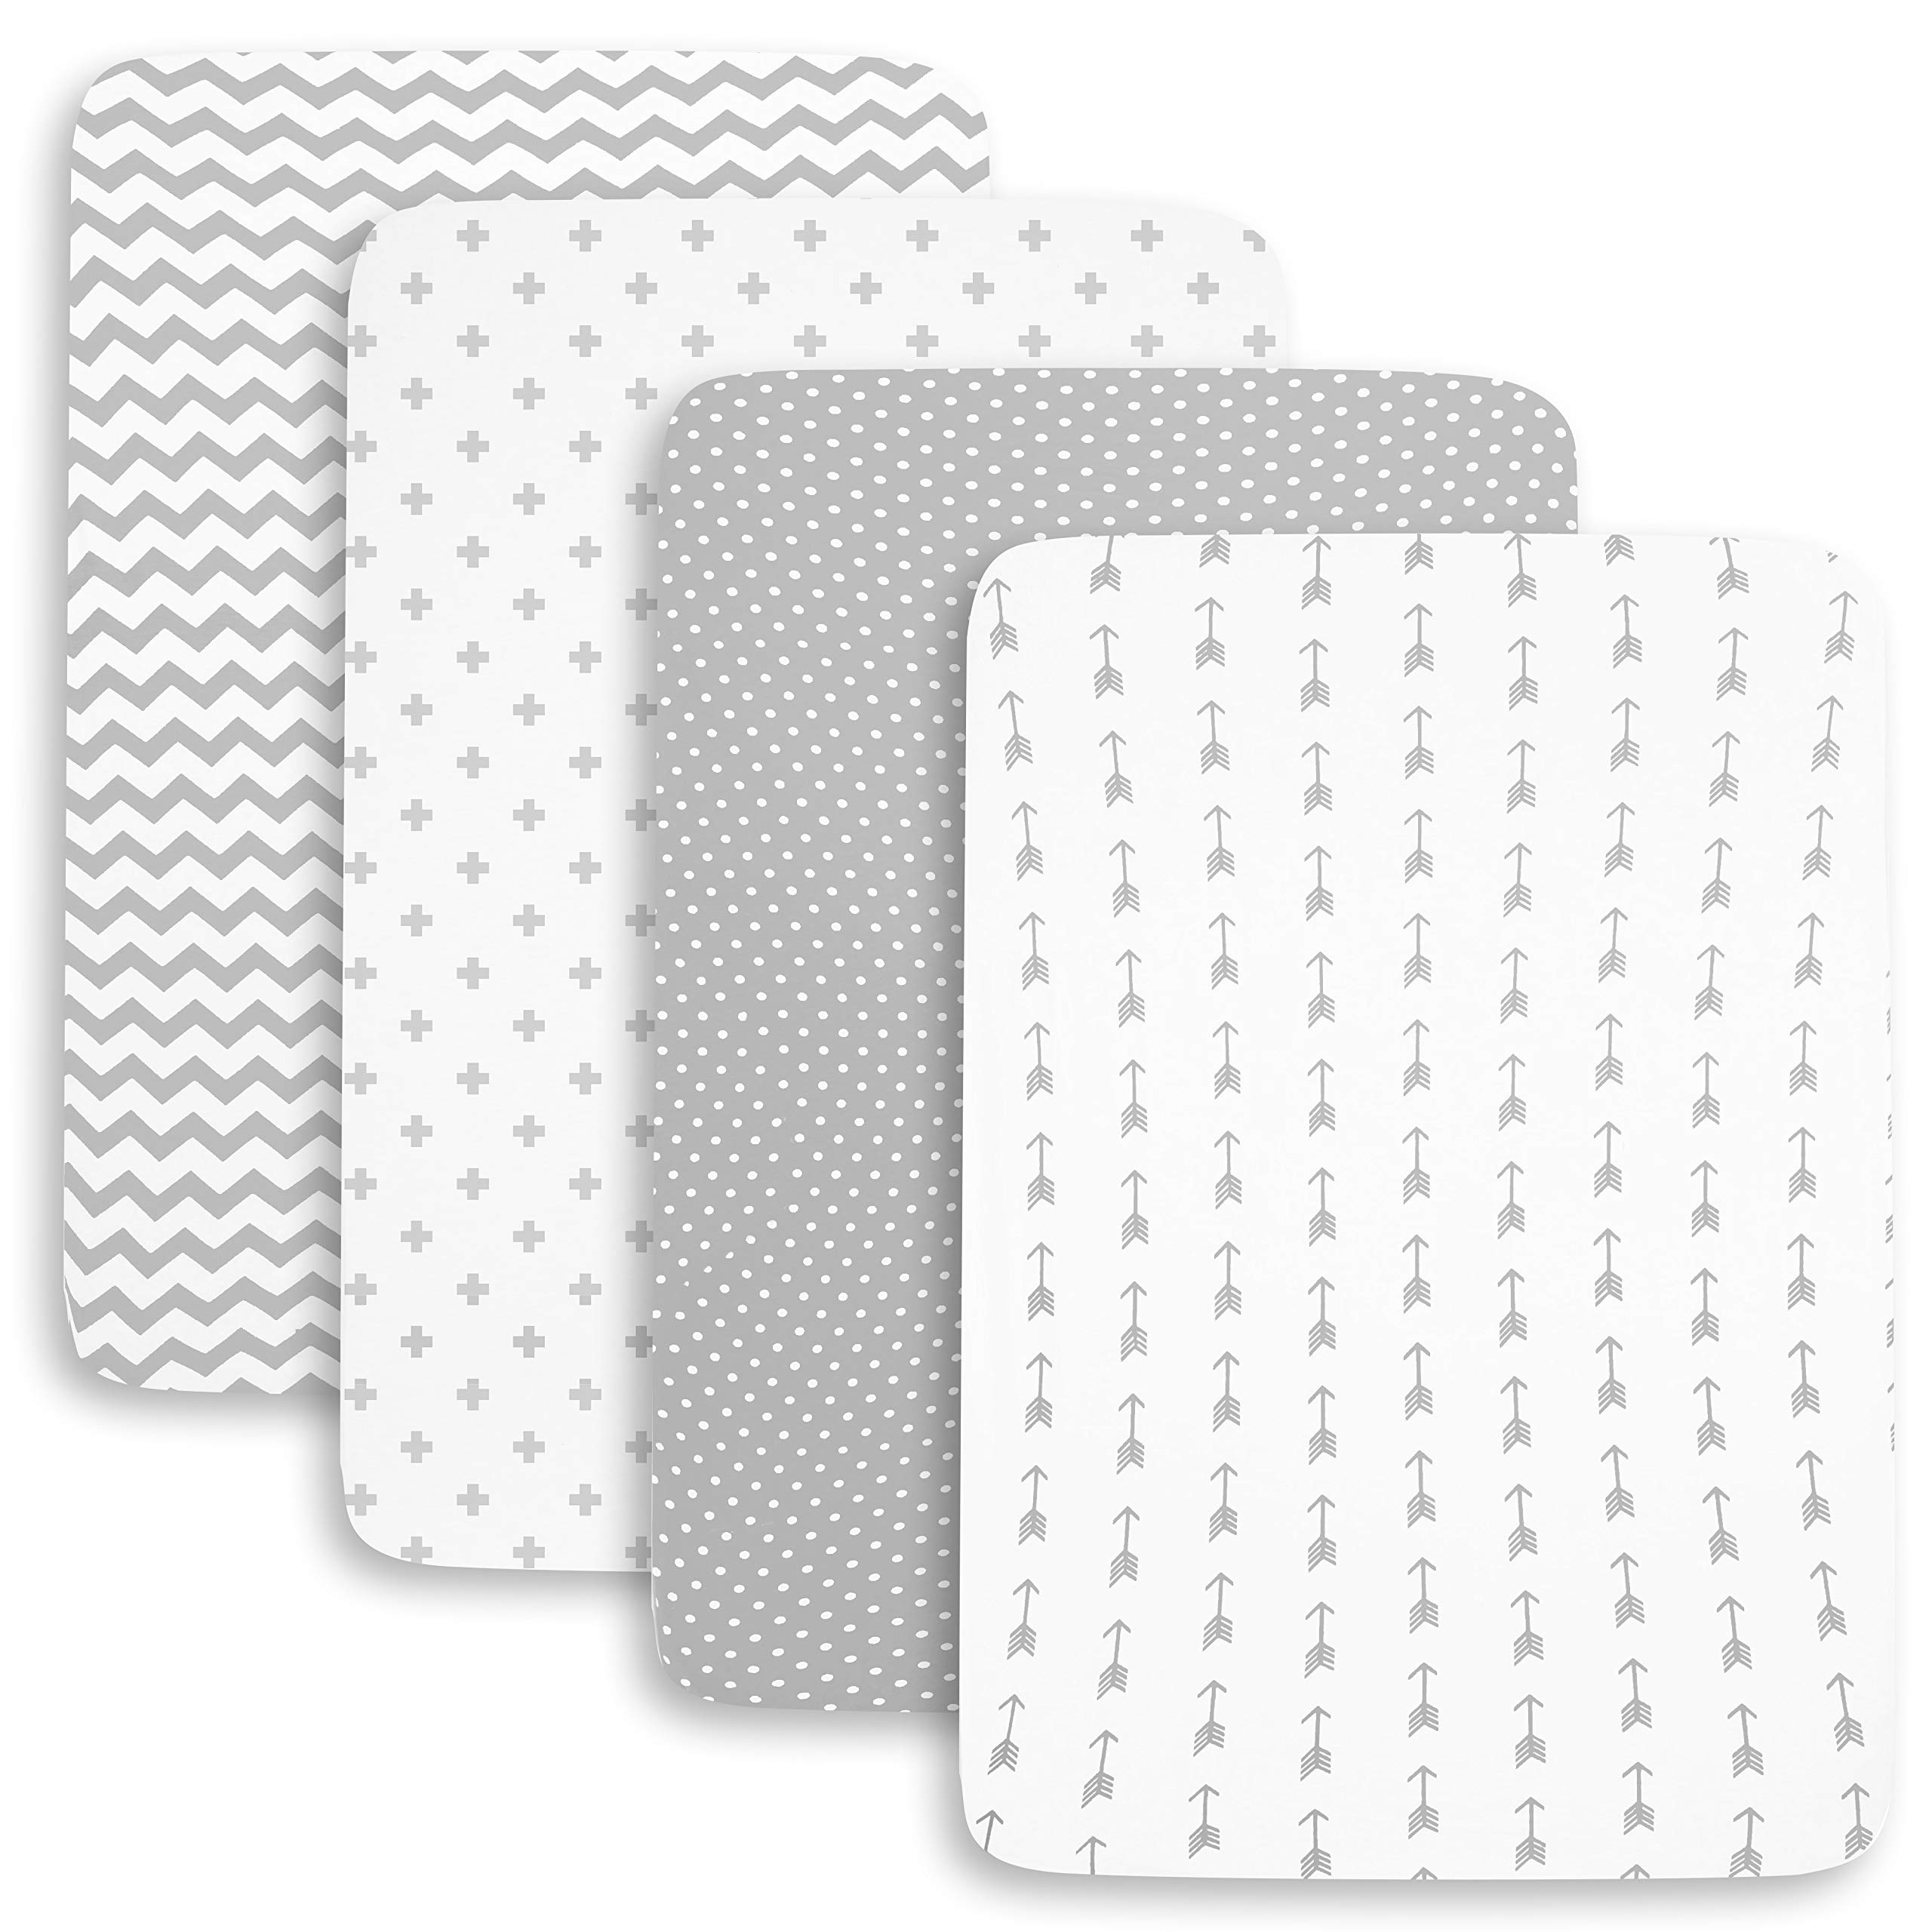 Pack n Play Sheets – Premium Pack and Play Sheets 4 Pack – 100% Super Soft Jersey Knit Cotton Playard Mattress Sheets – Portable Playpen Fitted Play Yard Mini Crib Sheet for Boy & Girl (24 x 38 x 5)